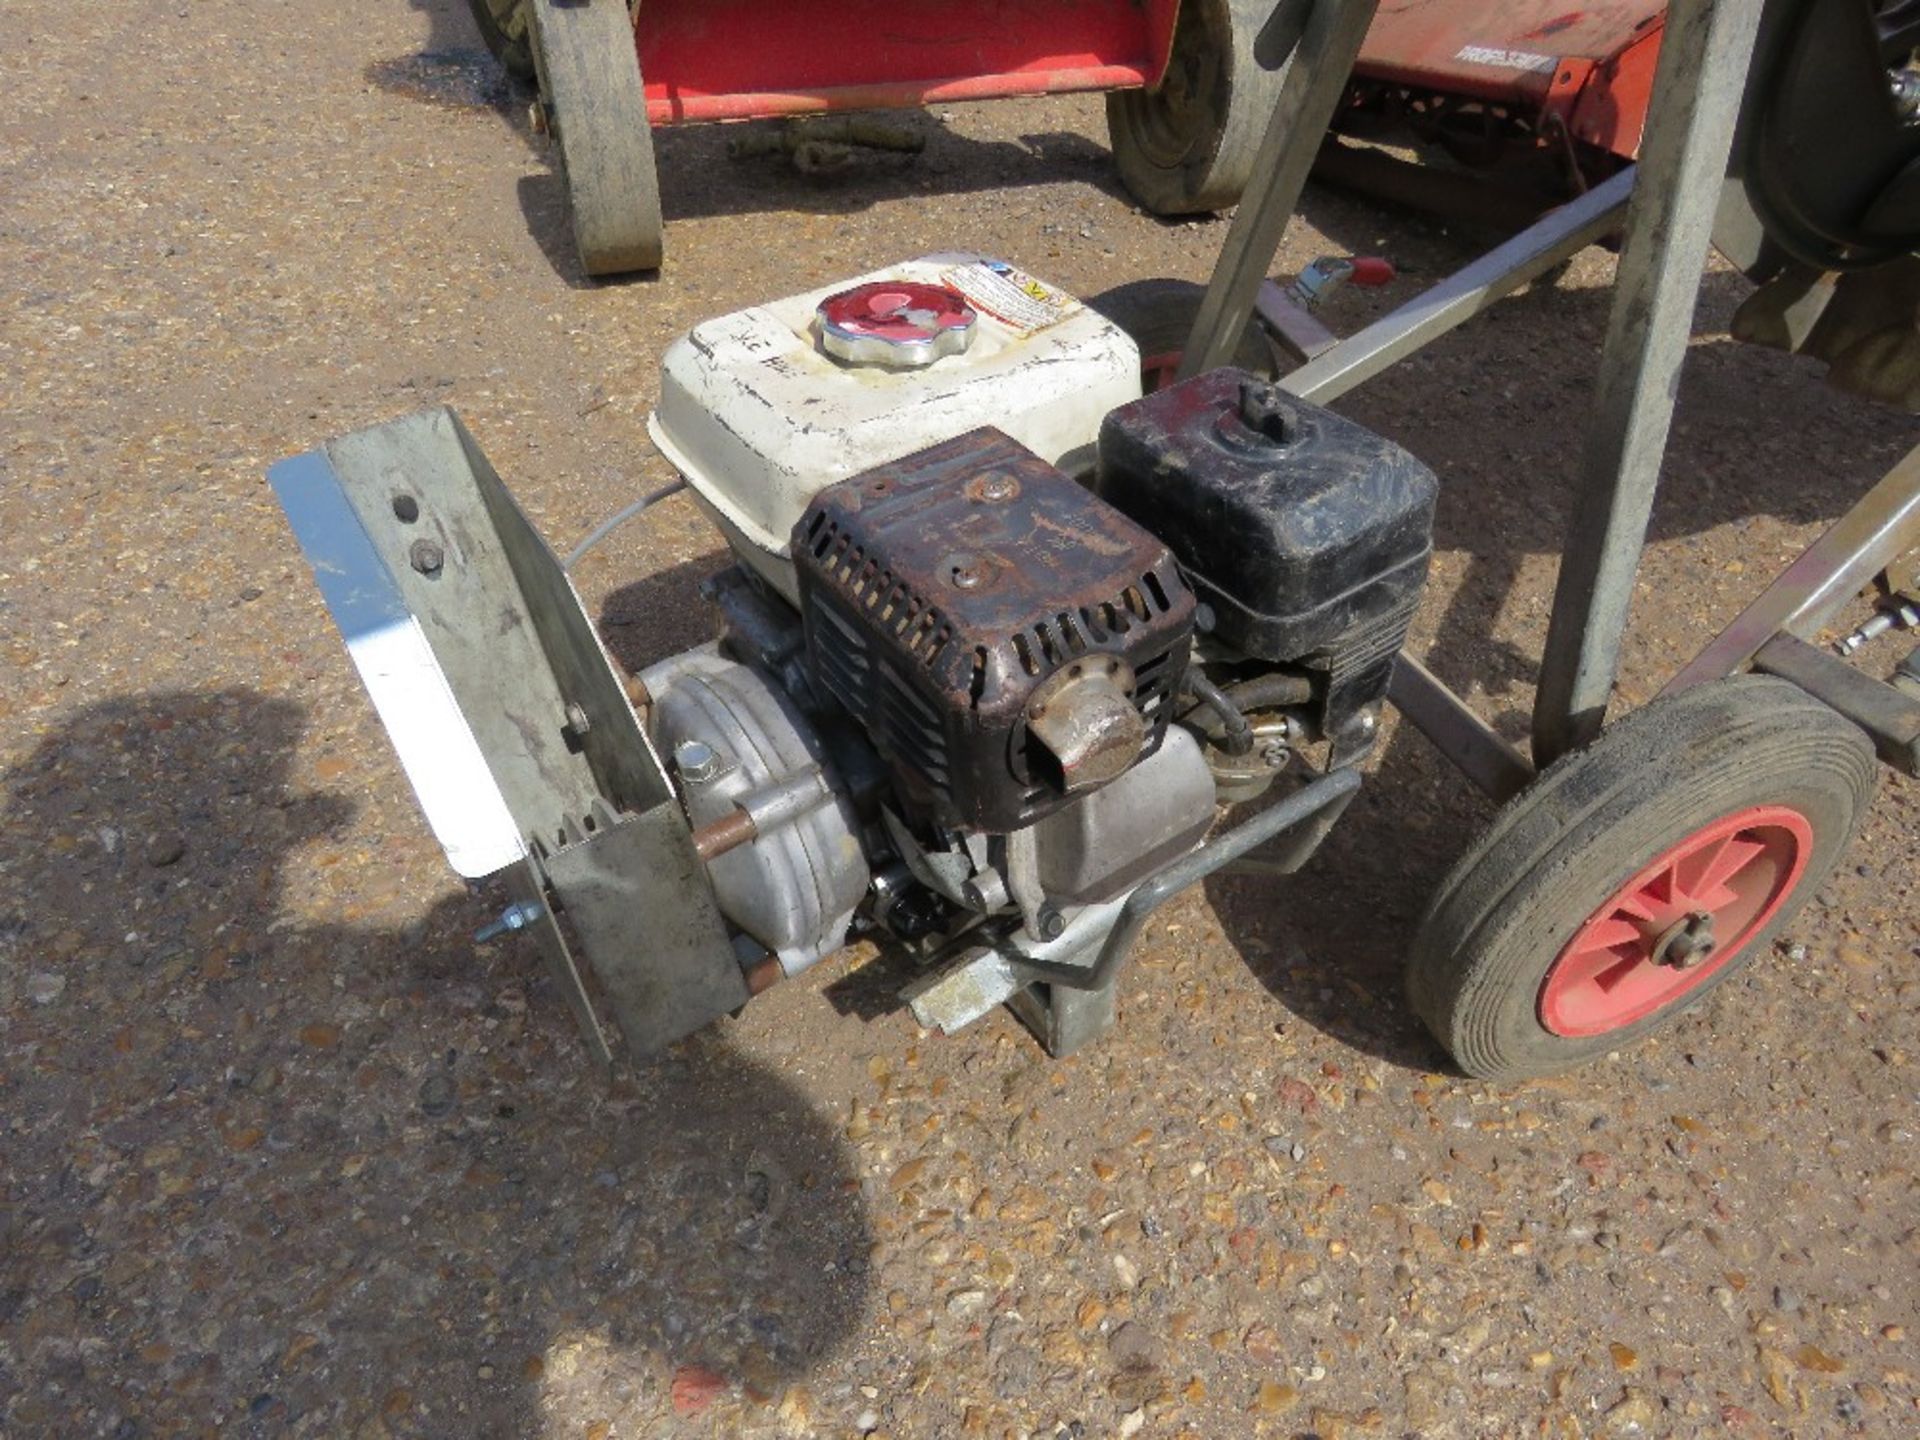 BUMPA PETROL ENGINED TILE HOIST WITH HONDA ENGINE, 32FT OVERALL LENGTH APPROX. - Image 2 of 15